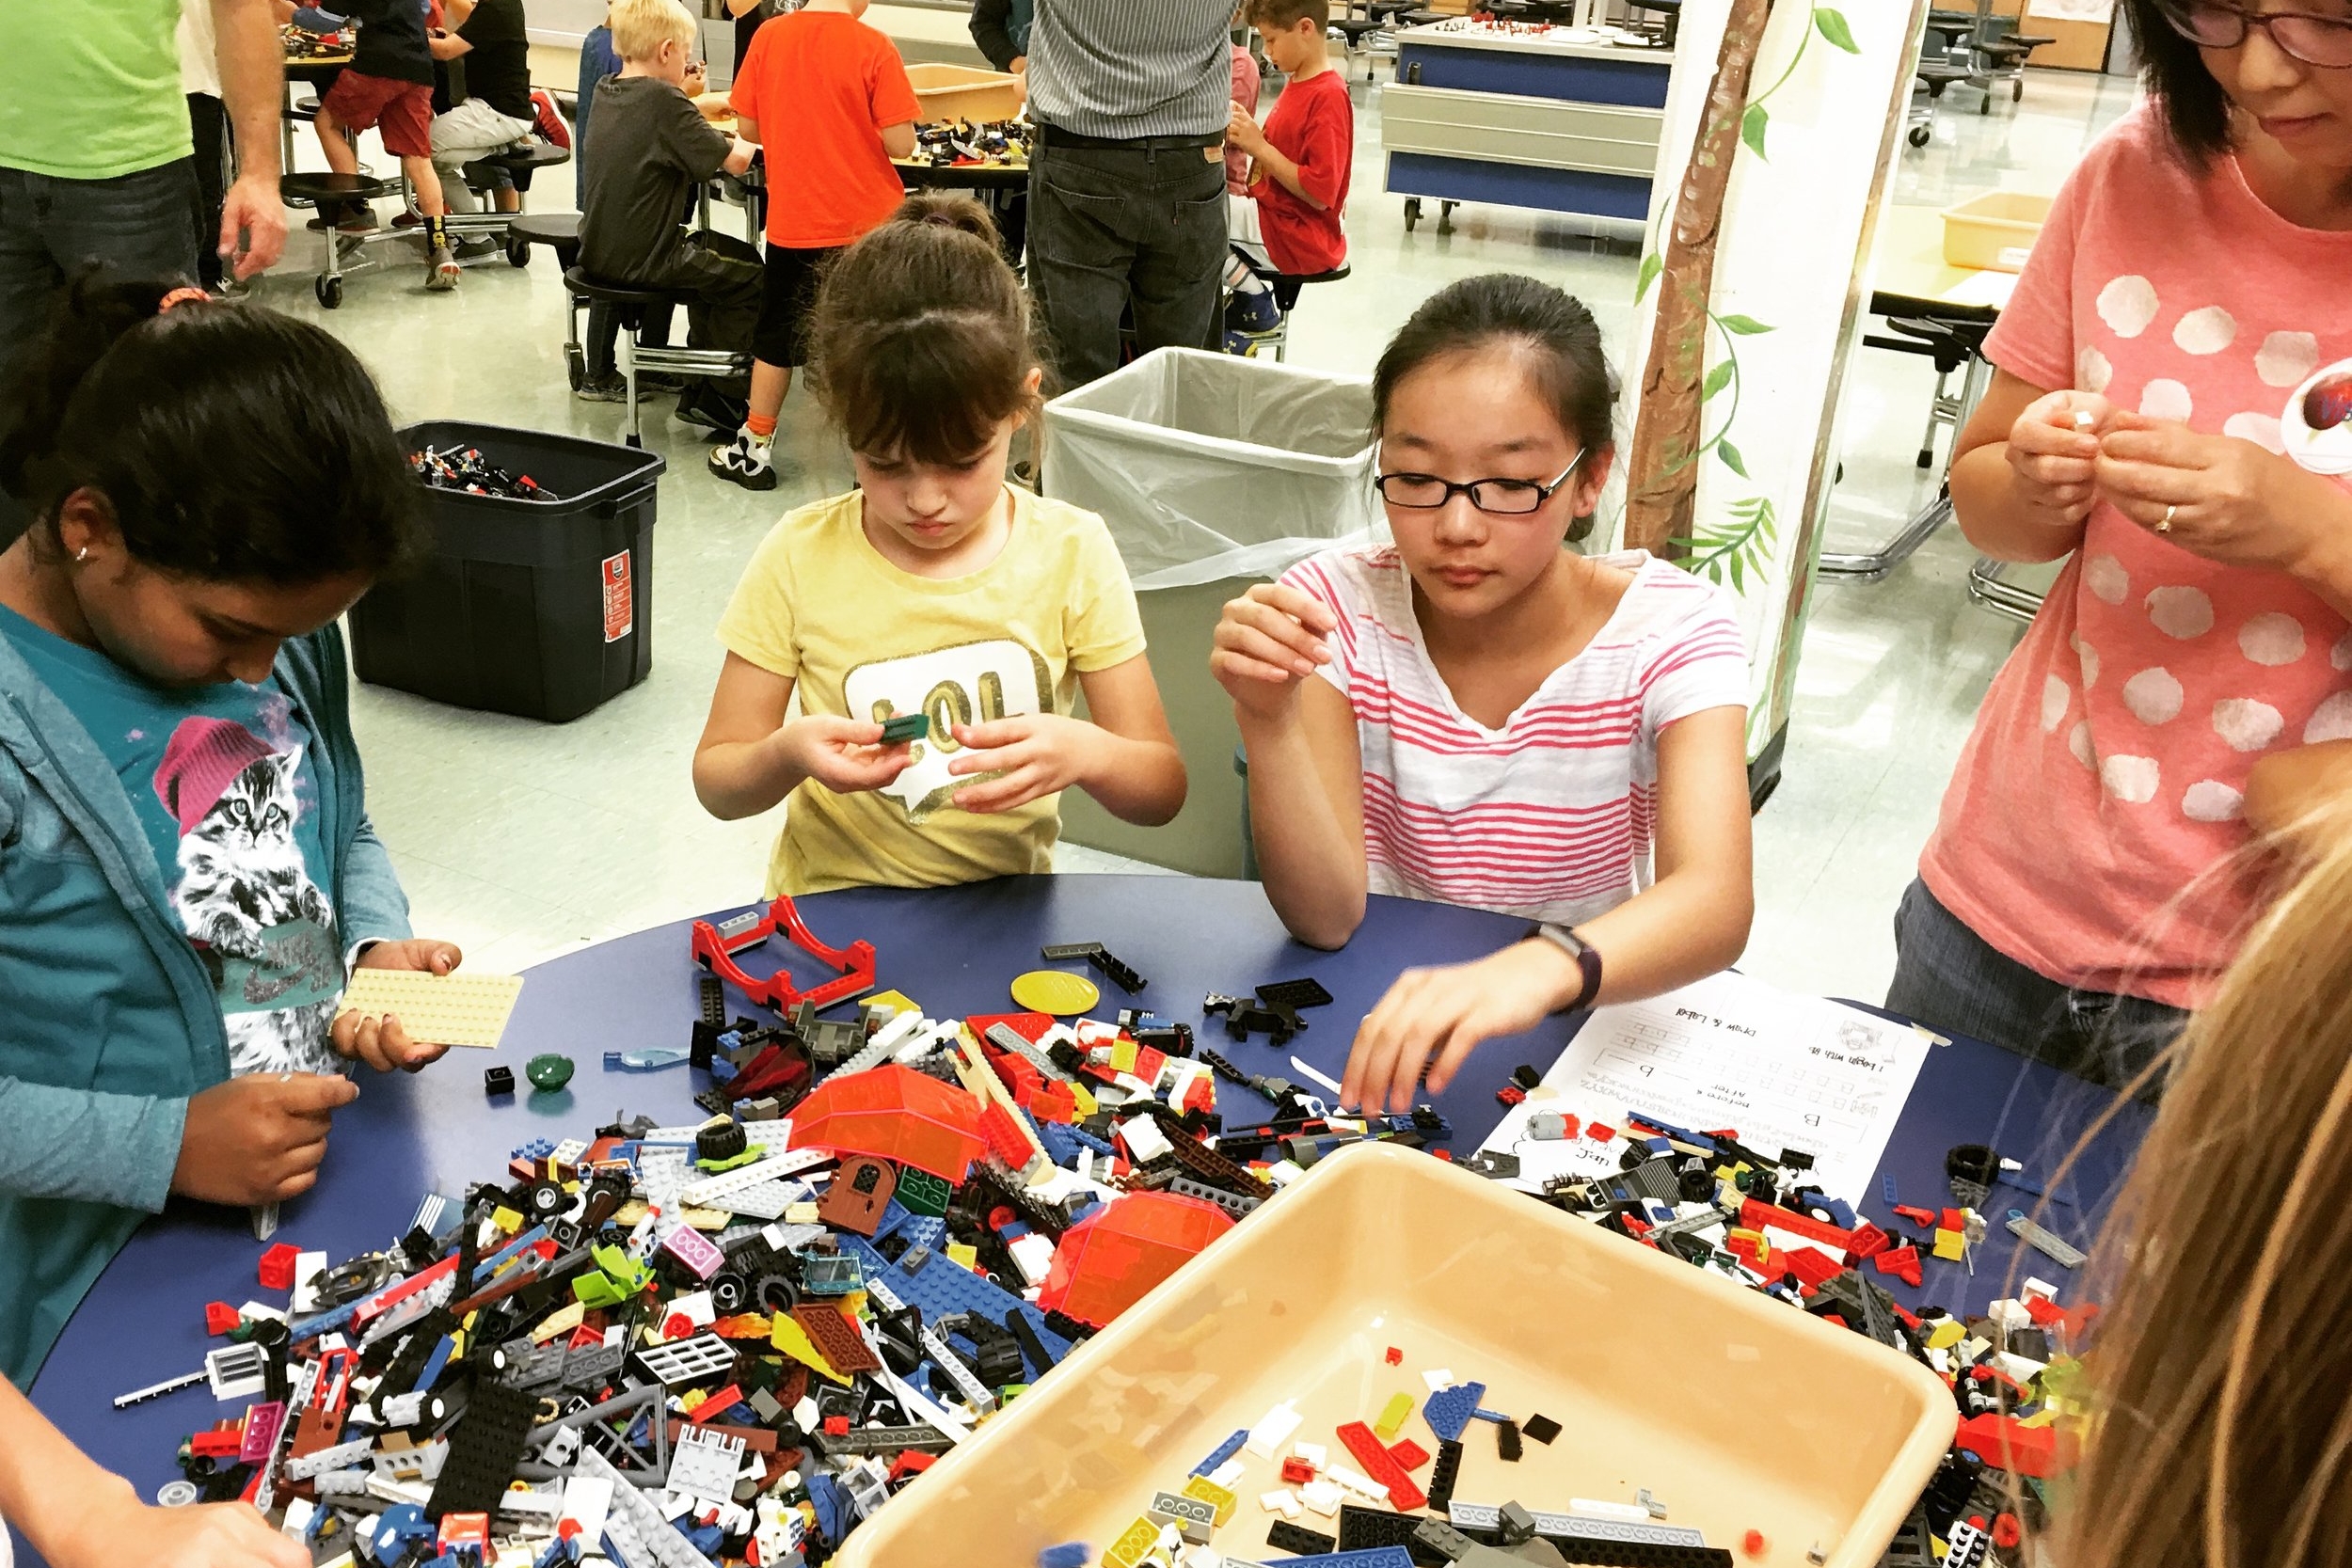 Overland Trail Elementary completed a lego sort for The Giving Brick during November 2016.